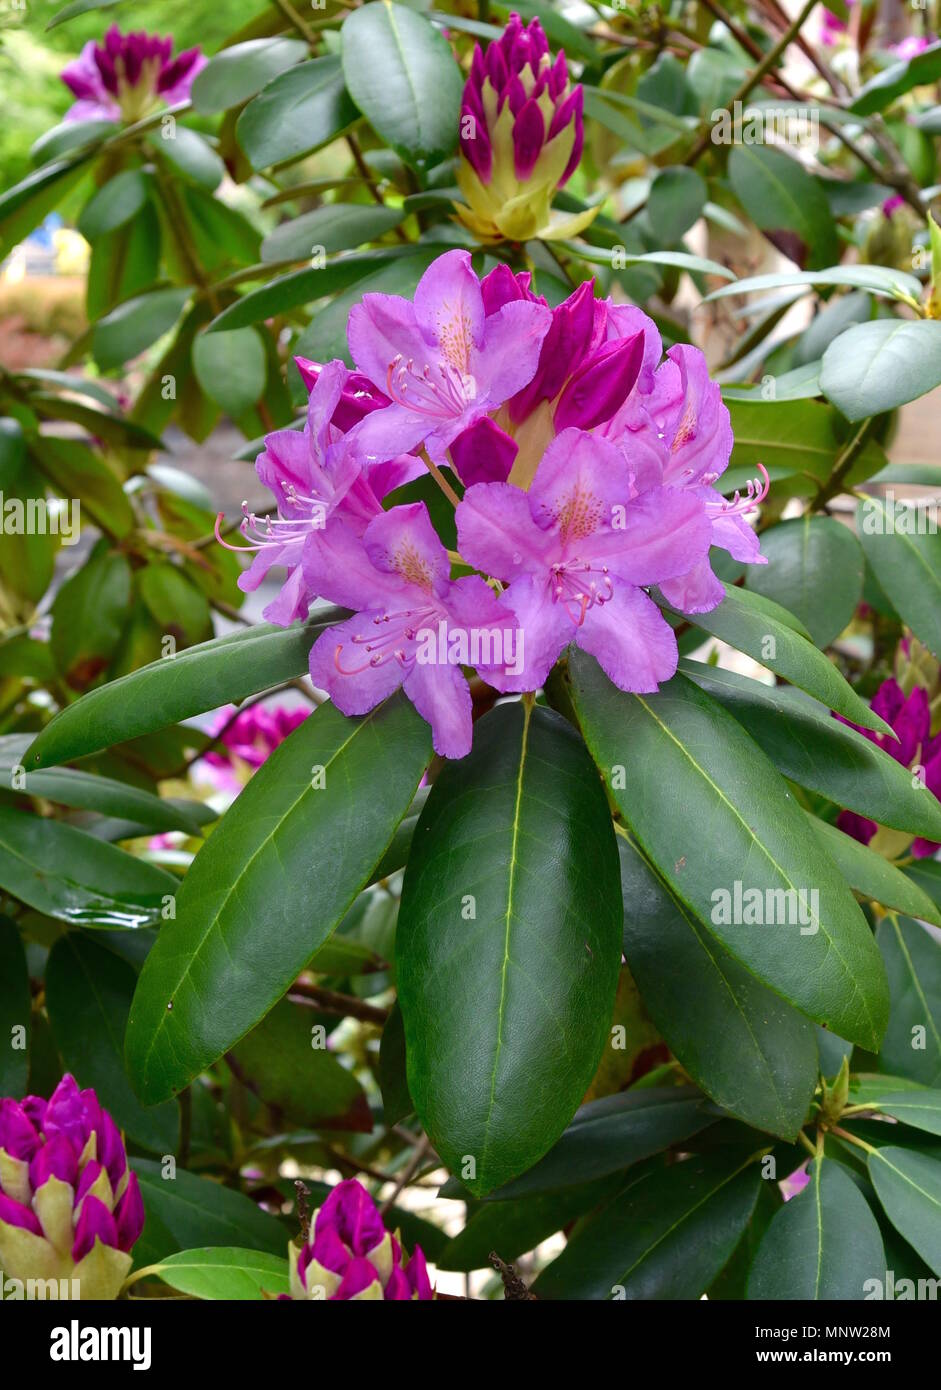 Pink flowers, purple buds and green leaves of a catawba rhododendron plant in a garden. Stock Photo